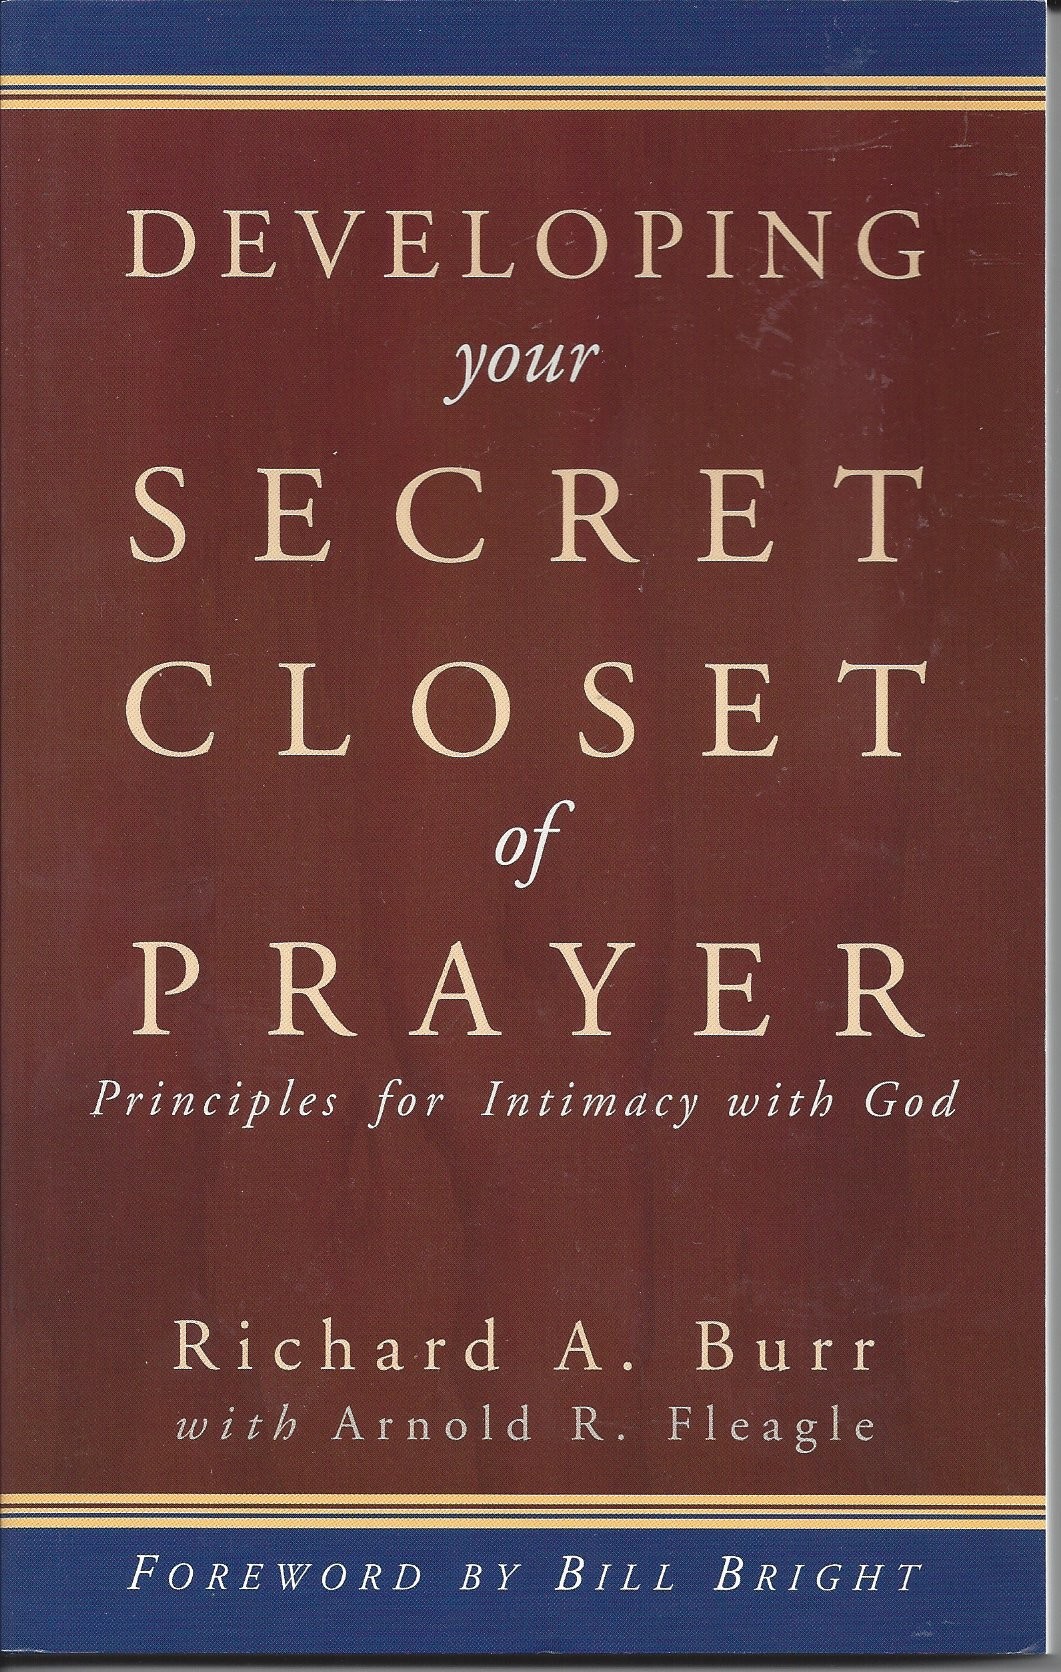 Developing Your Secret Closet Of Prayer   Principles For Intimacy With God  (1998)  Front